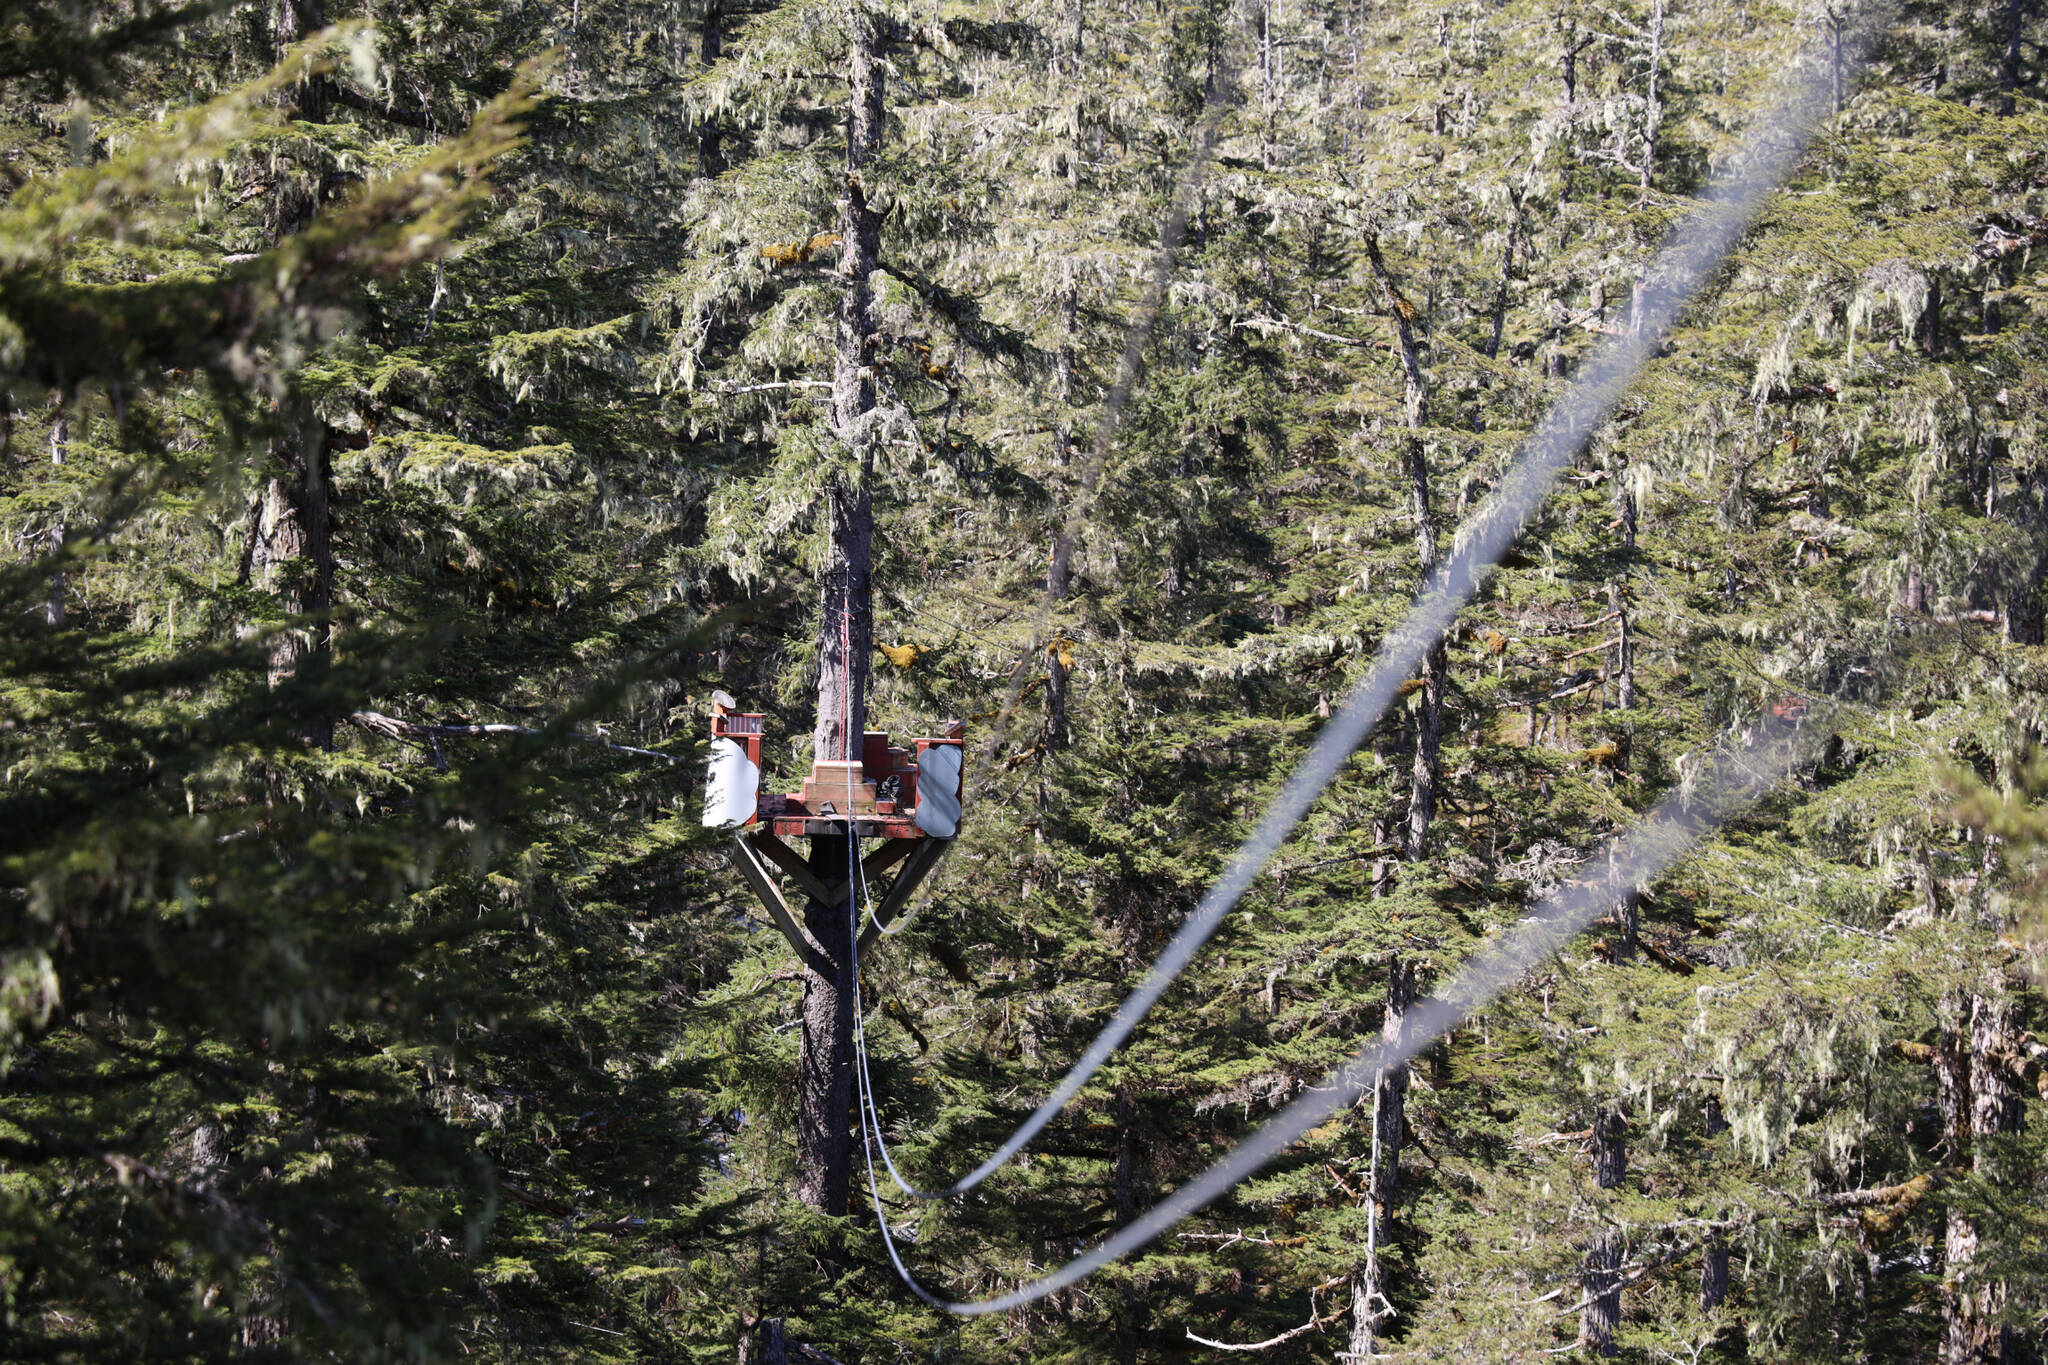 A wire cable stretches high above the forest ground and connects two platforms for zip lining at Eaglecrest Ski Area. Zip line tours are set to be offered again this summer at the ski area starting in late June after three years of halted operations due to COVID-19 and staffing issues. (Clarise Larson / Juneau Empire)